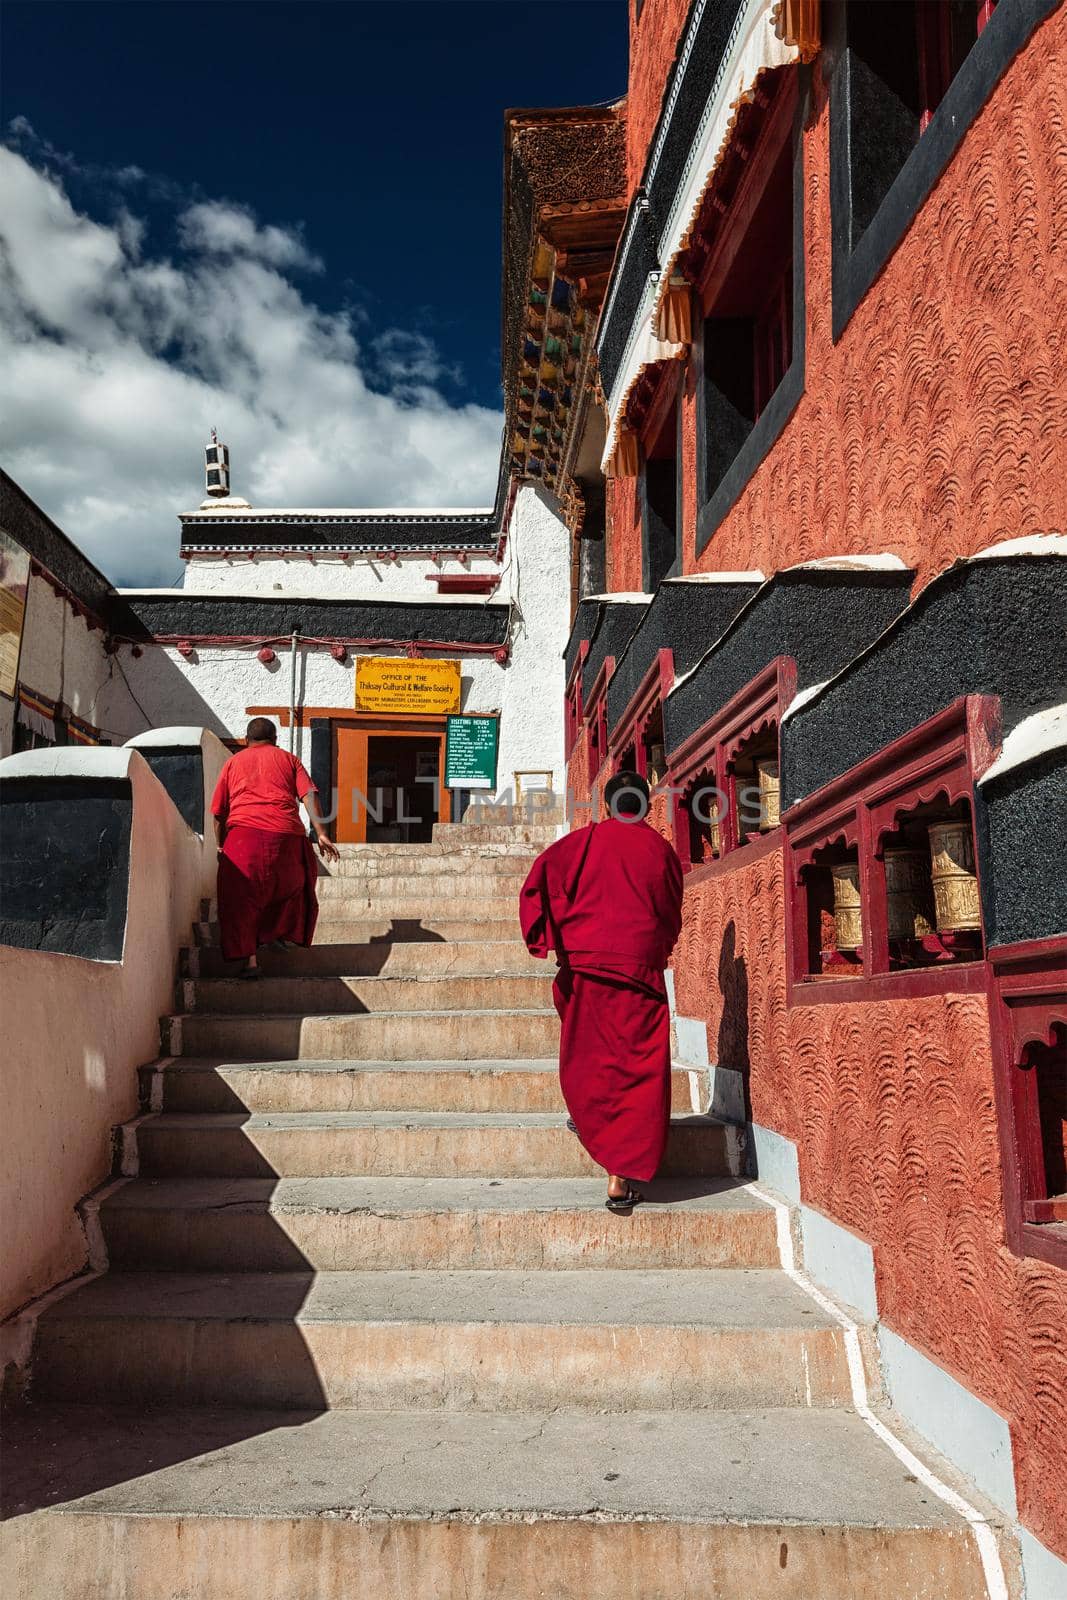 Young Buddhist monks walking on stairs along prayer wheels in Thiksey gompa by dimol